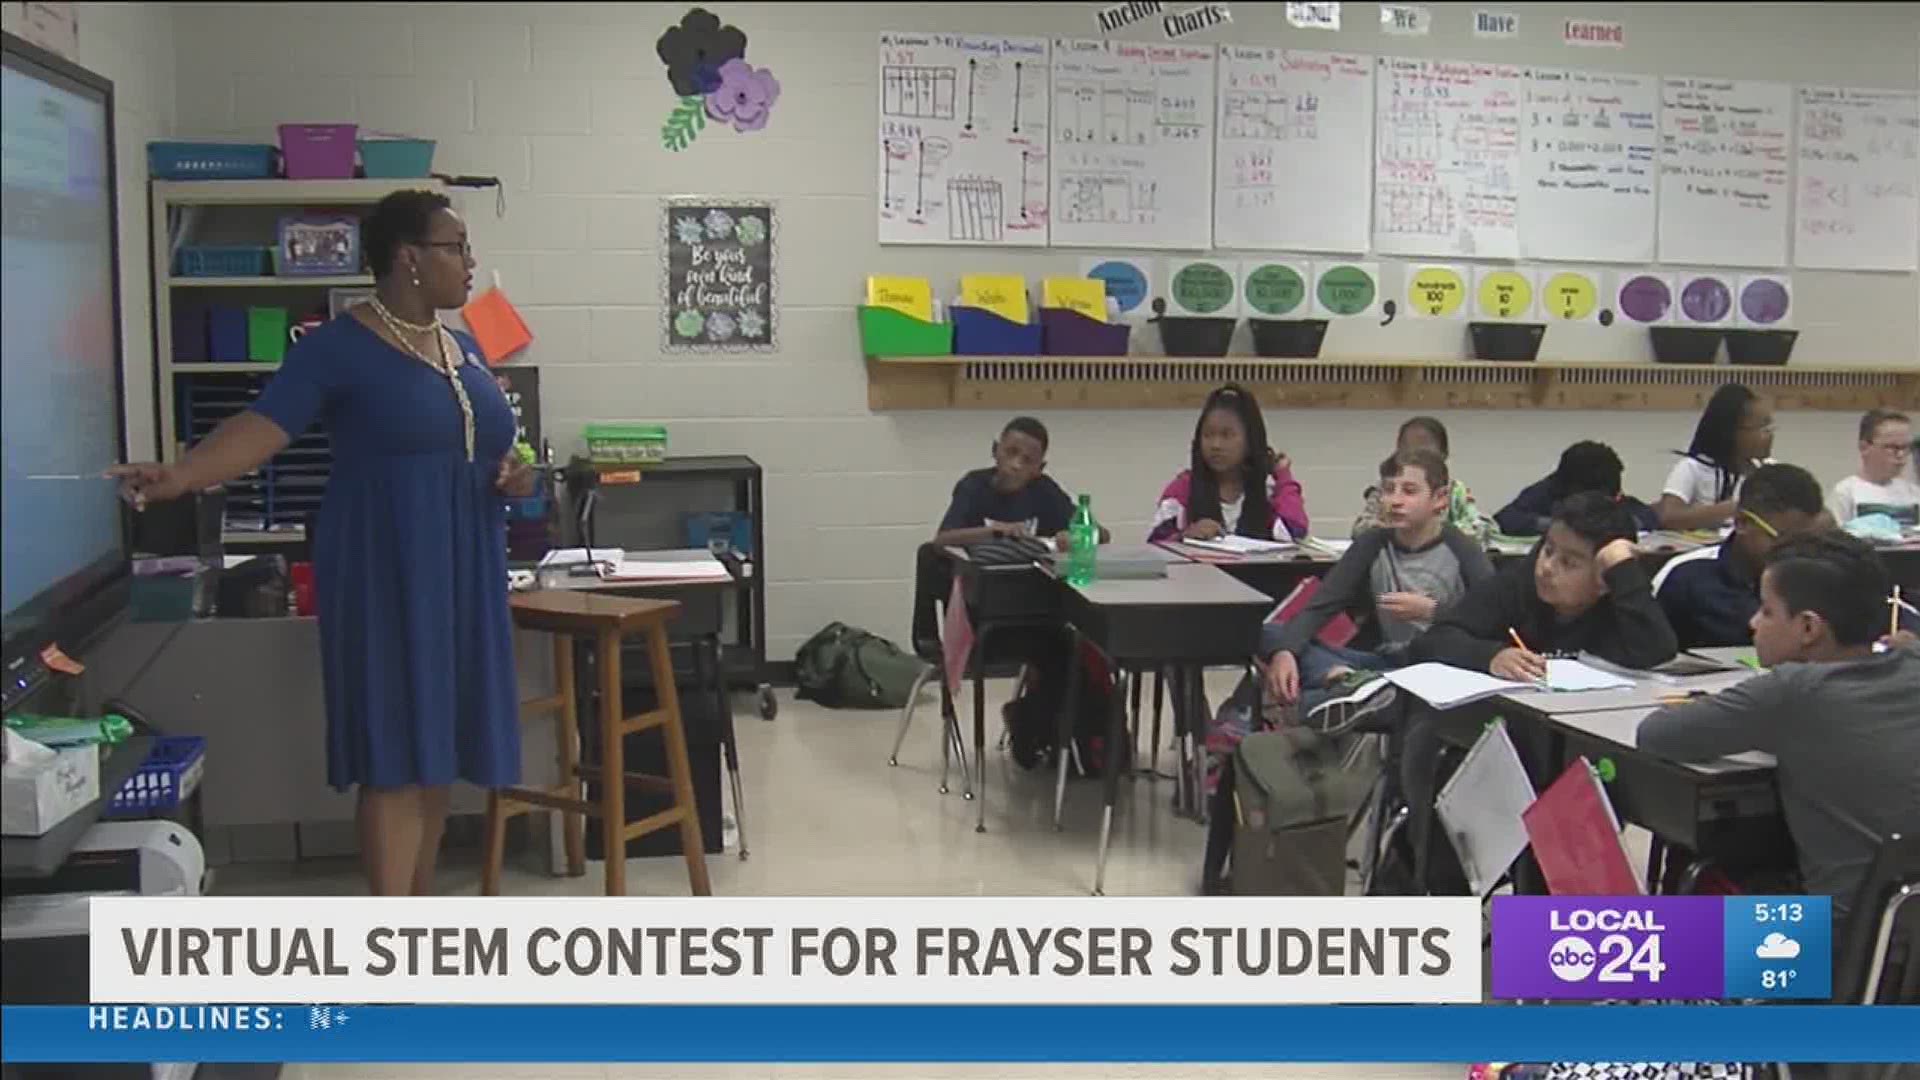 “We see what our community needs and our children need. We try to help provide it as best we can,” said Regenia Dowell, Frayser Community PTSA.